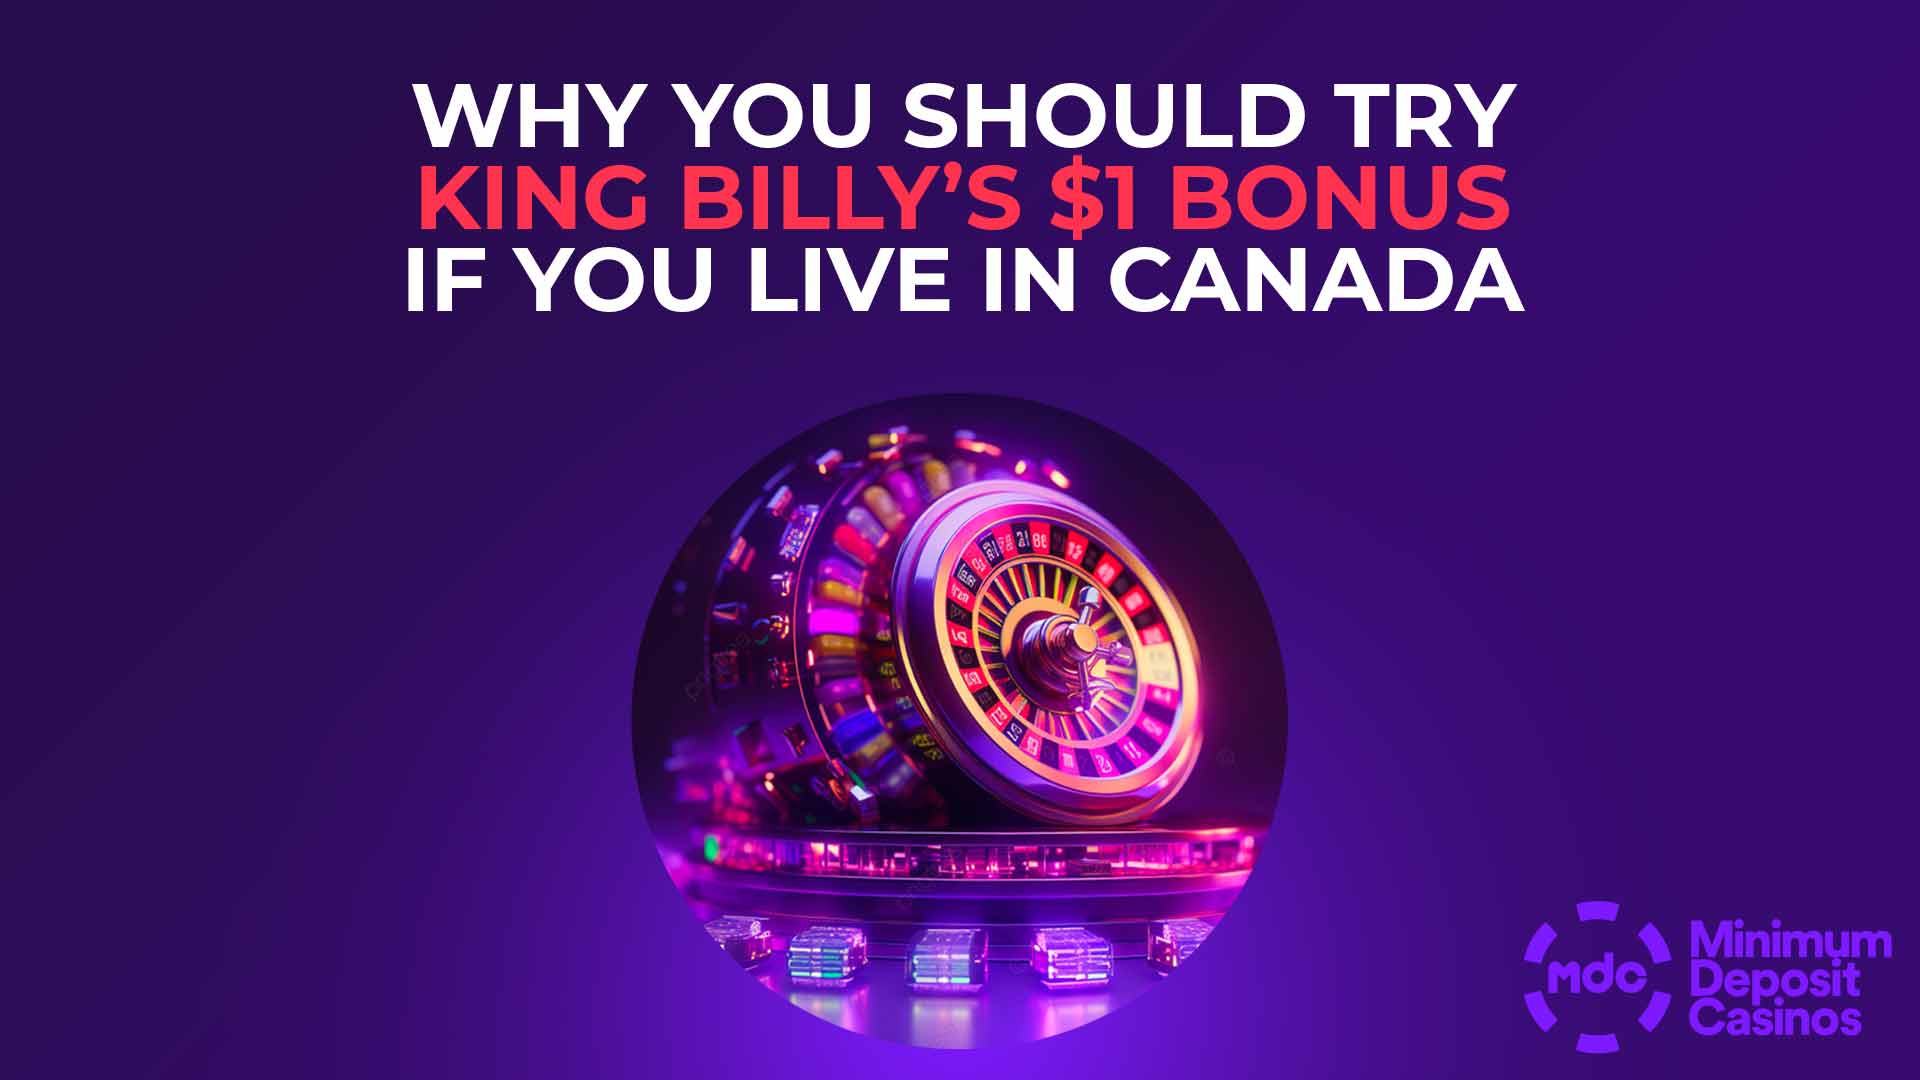 Heres why you should Try the King Billy $1 bonus if you live in Canada